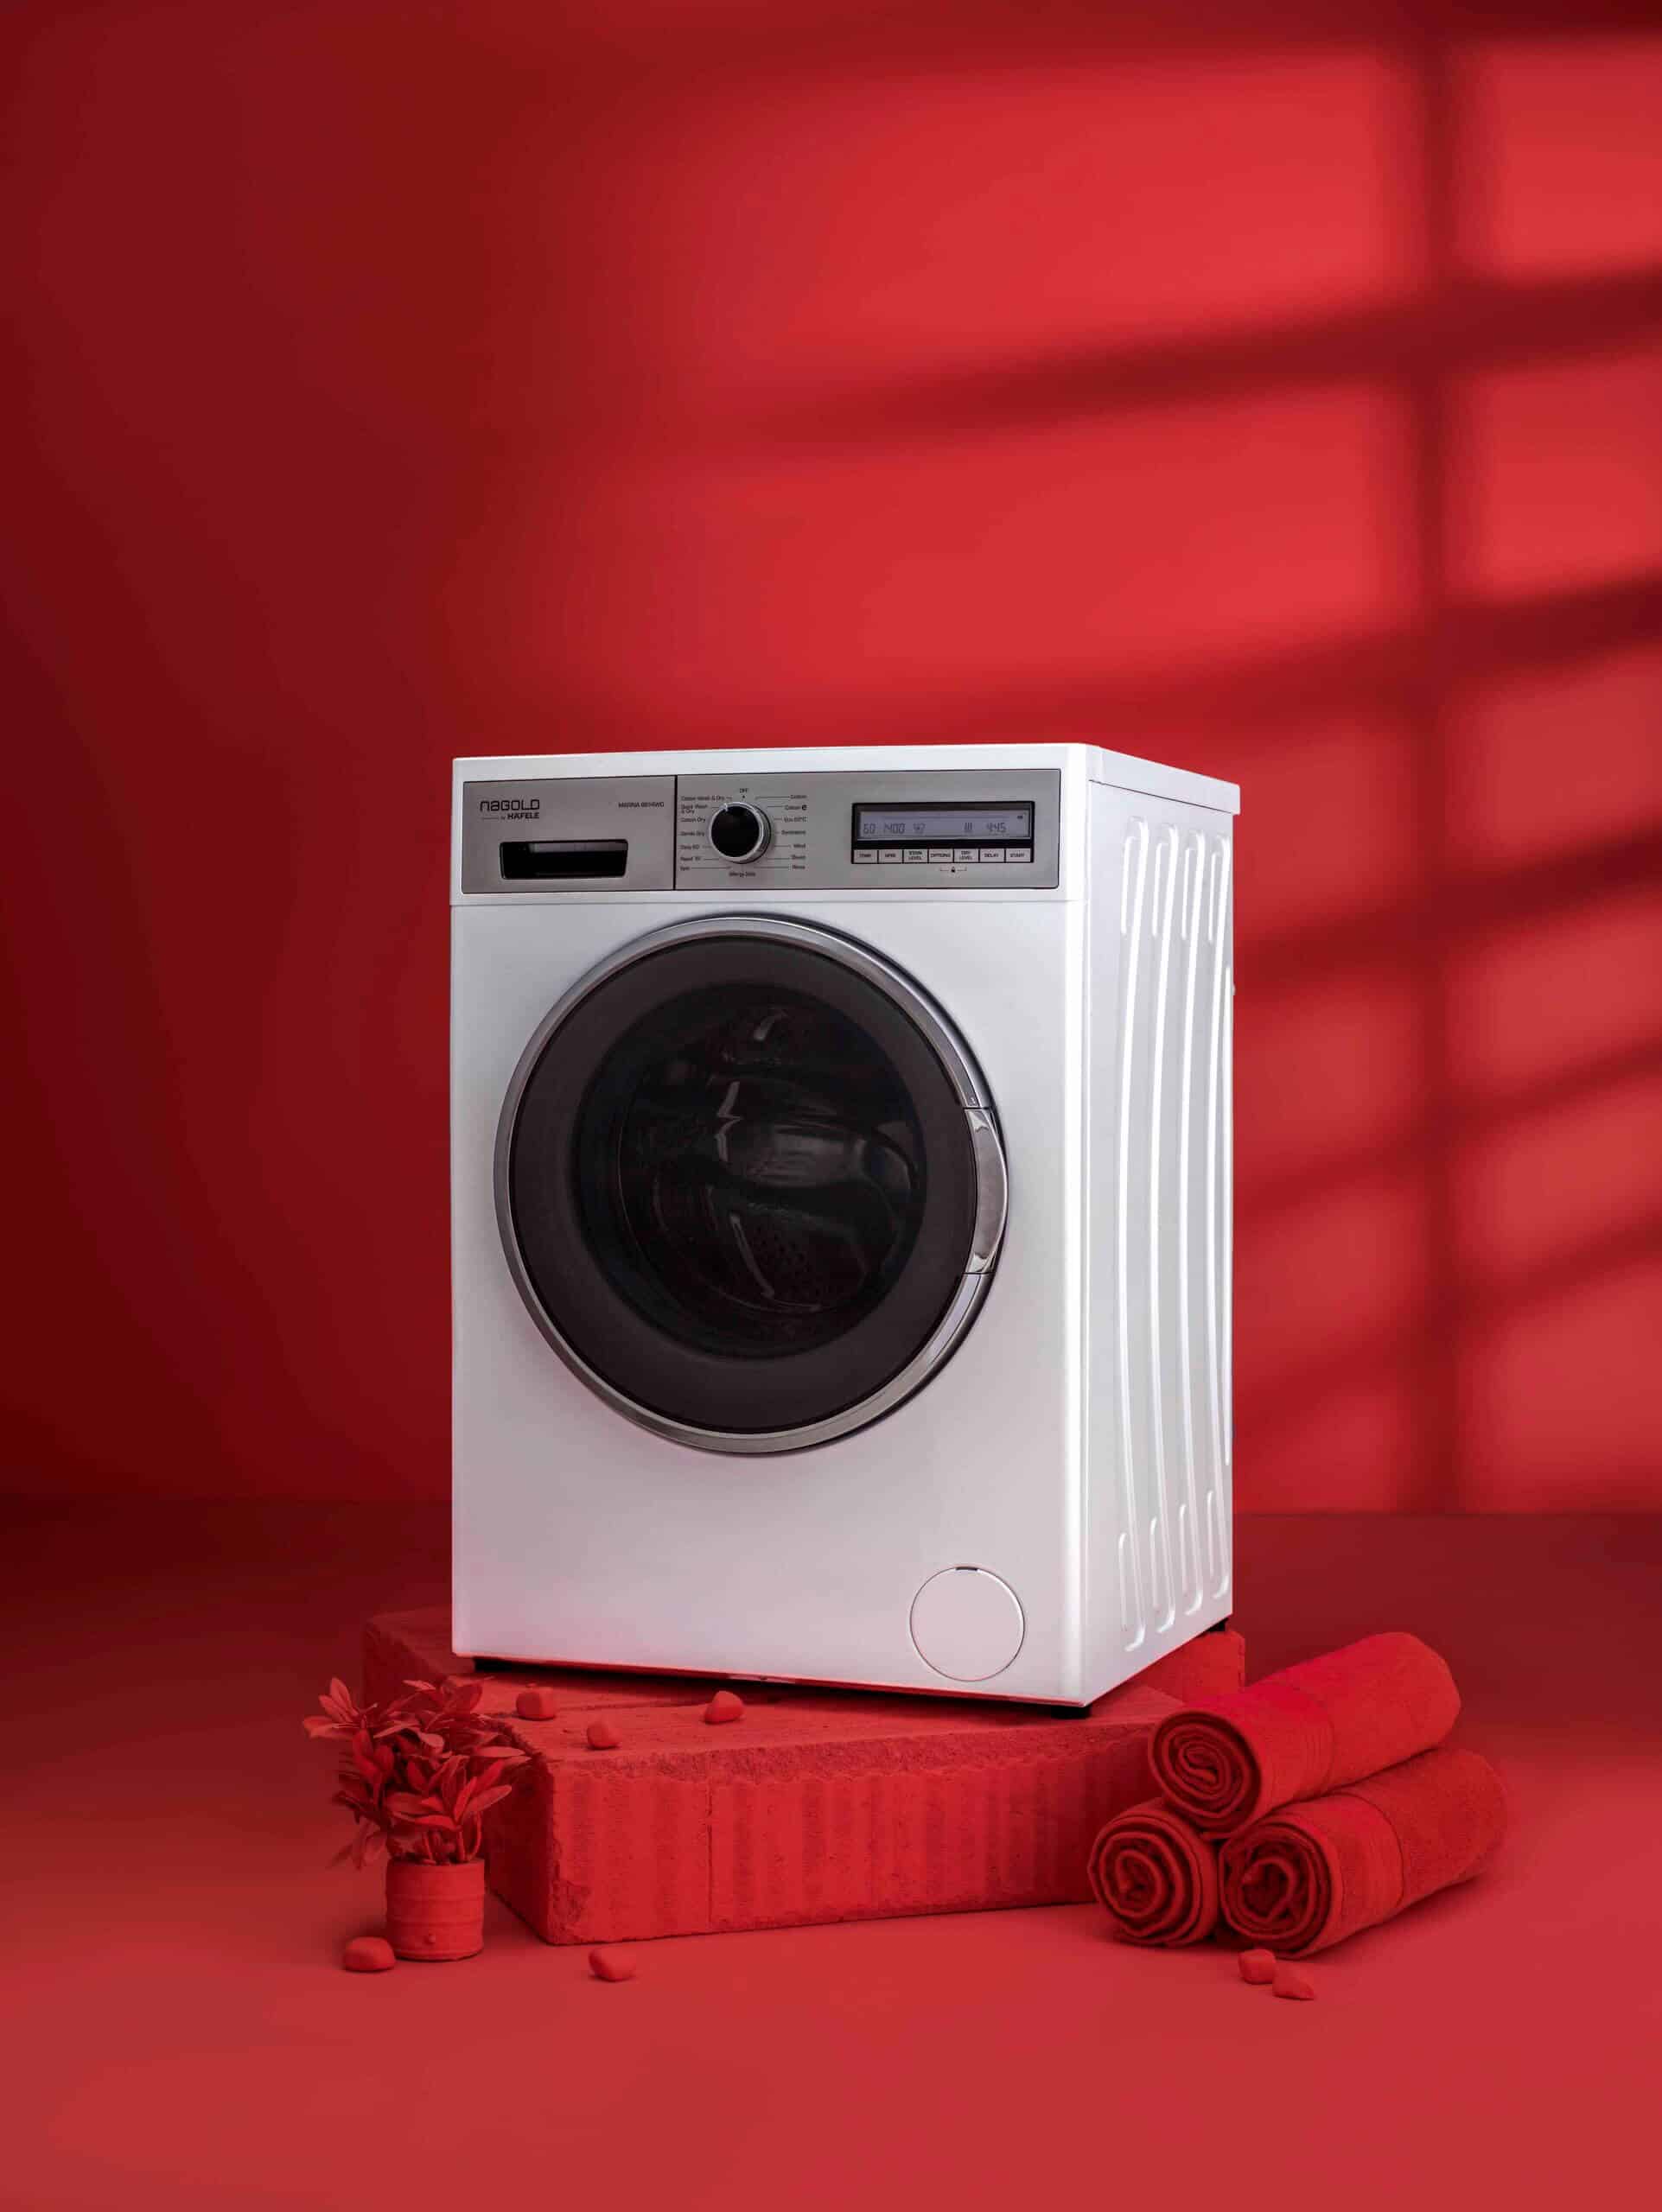 Hafeles Marina Washer Dryer Combo Machines in white colour with LED display